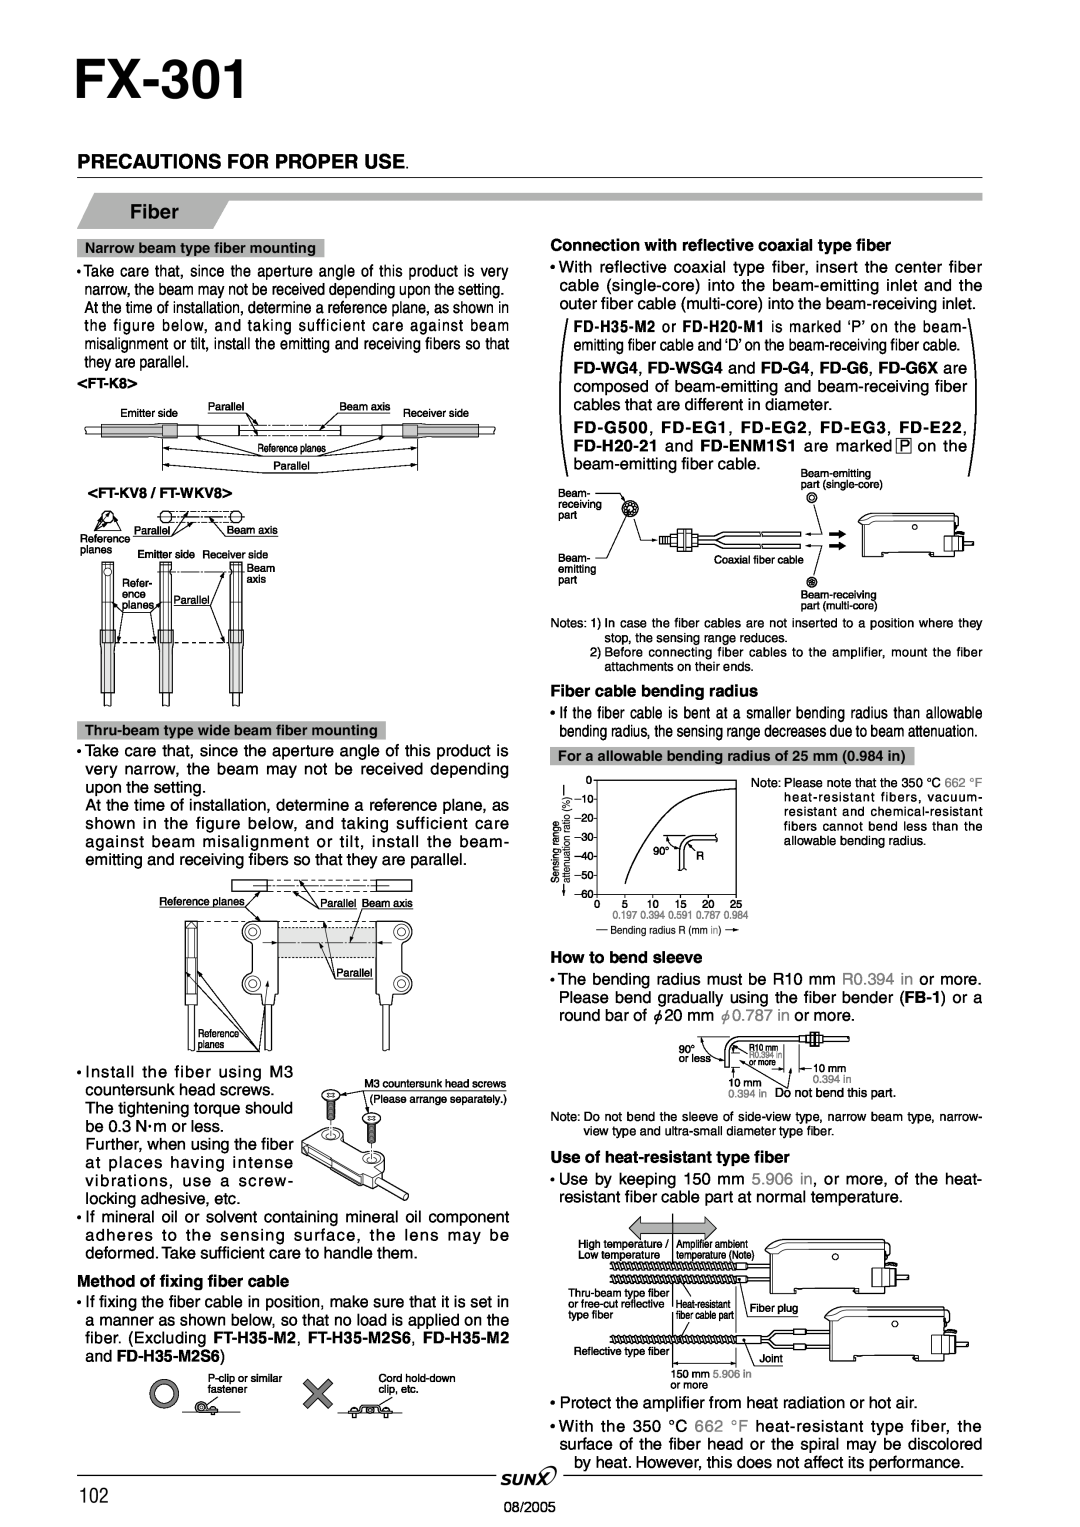 Panasonic FX-301 manual PRECAUTIONS FOR PROPER USE Fiber, Connection with reflective coaxial type fiber, How to bend sleeve 